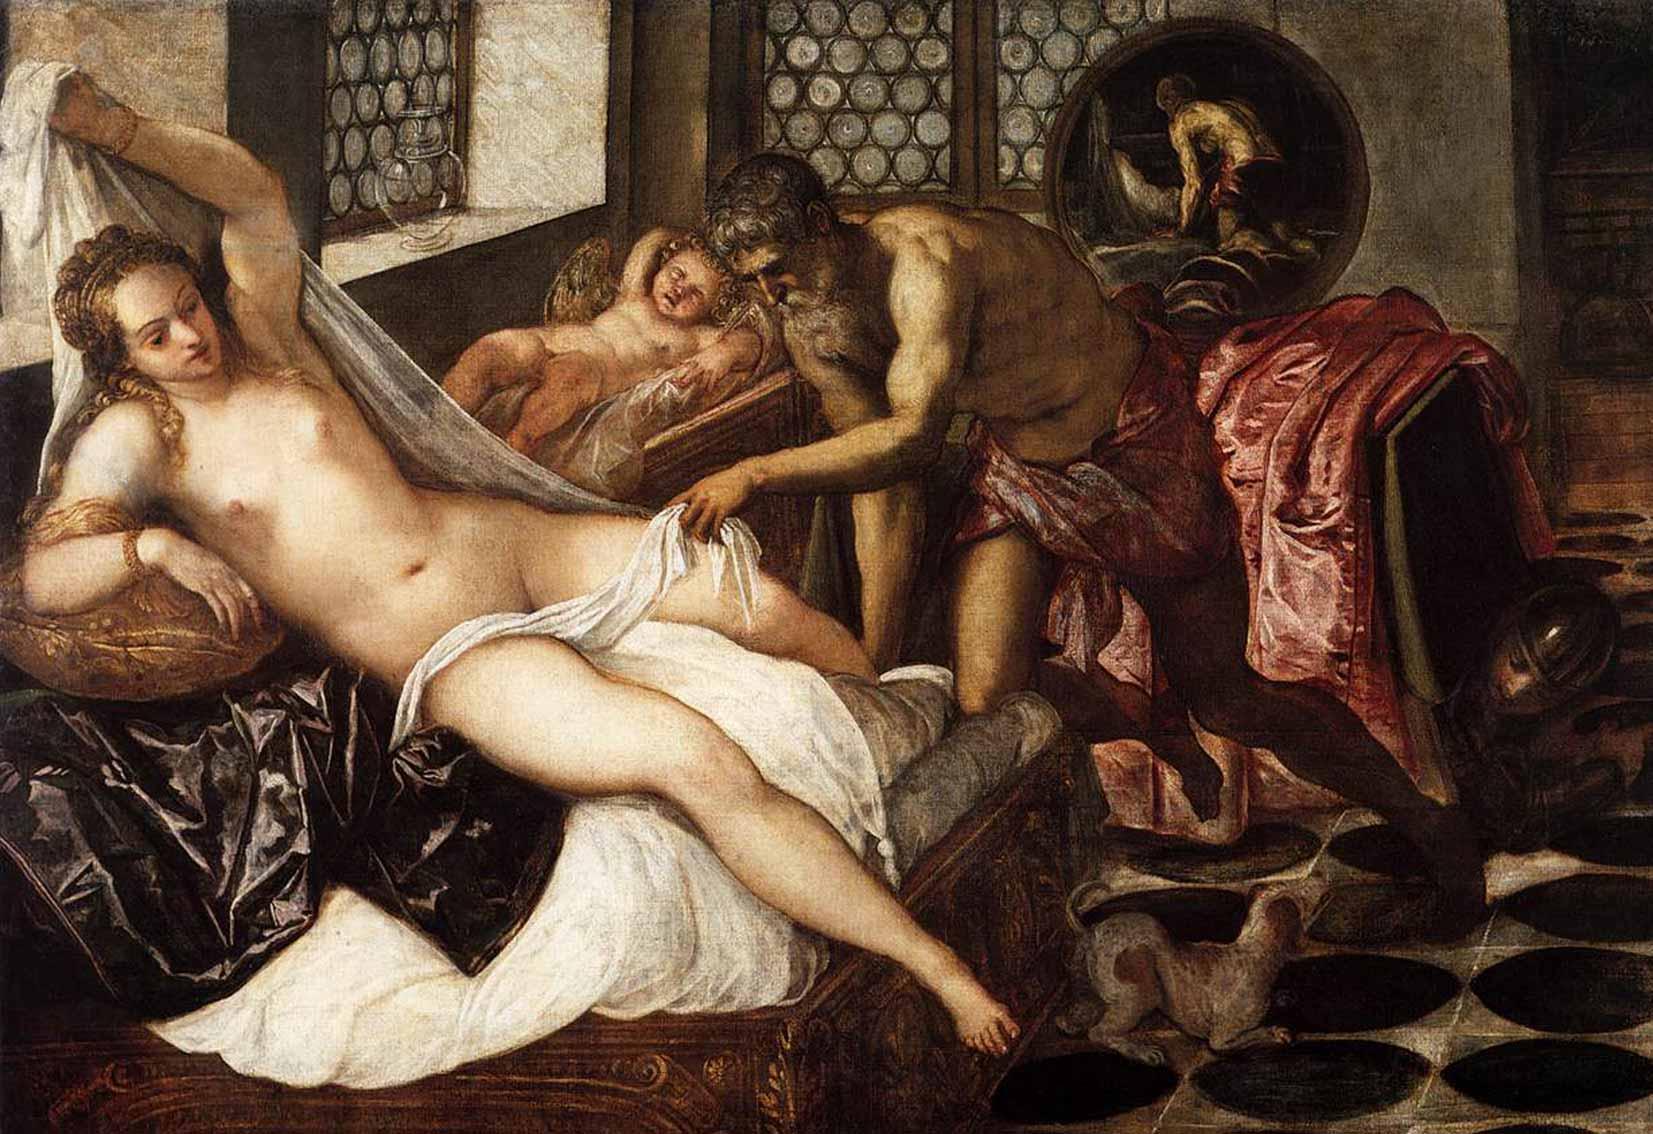 Jacopo Tintoretto, Venus and Mars Surprised by Vulcan, c. 1551.